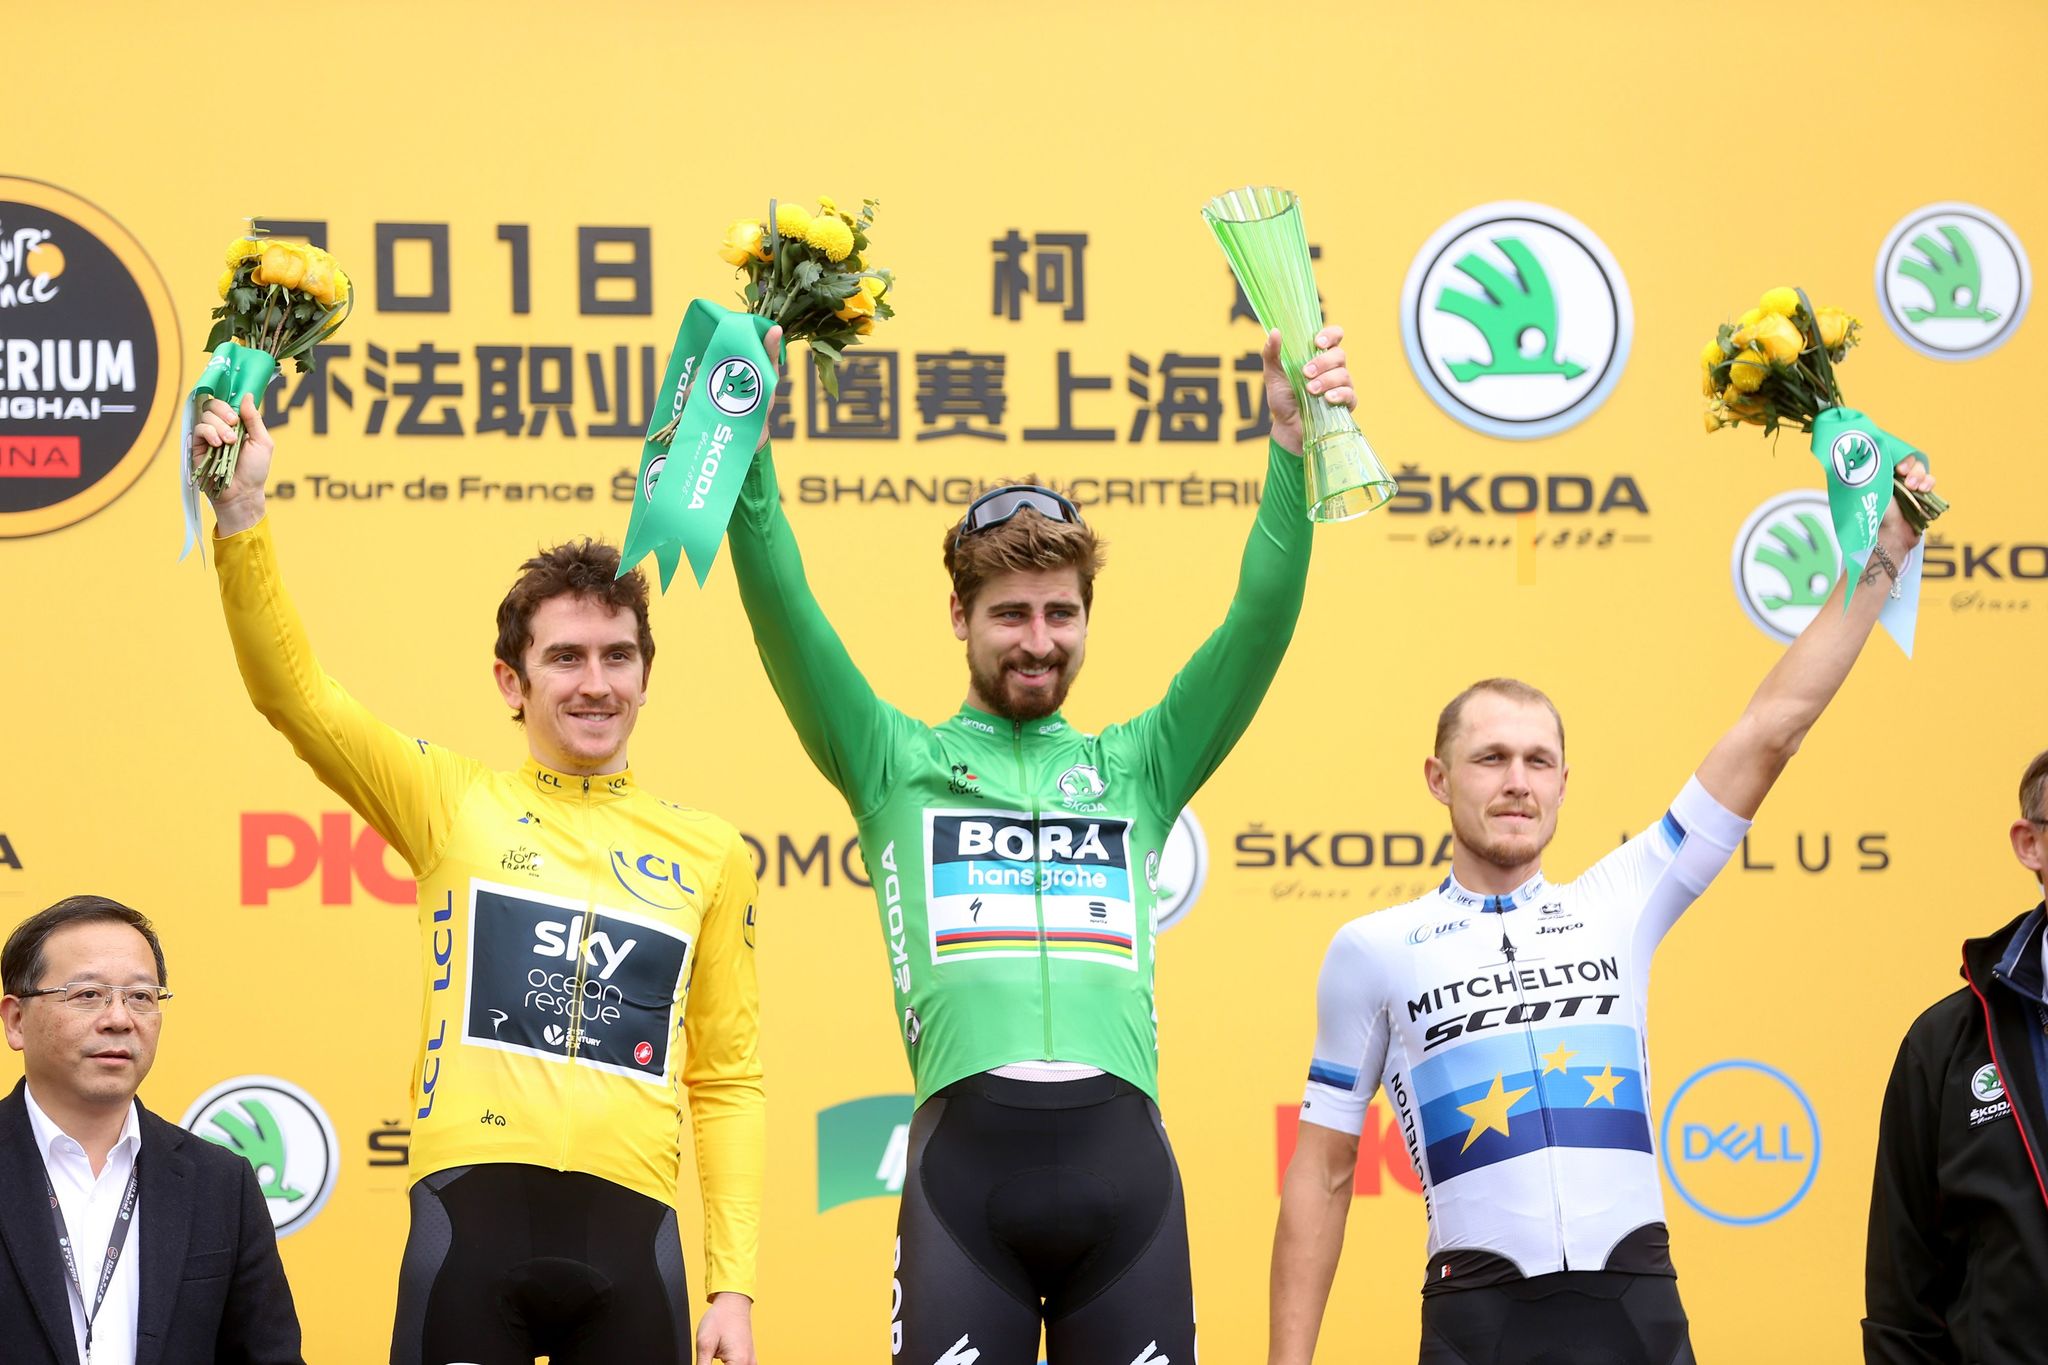 Slovakias Peter lt;HIT gt;Sagan lt;/HIT gt; celebrates winning the Tour de France Shanghai Criterium with third-placed Pierre-Roger Latour of France (R) and second-placed Geraint Thomas of Britain (L) in Shanghai on November 17, 2018. (Photo by STR / AFP) / China OUT